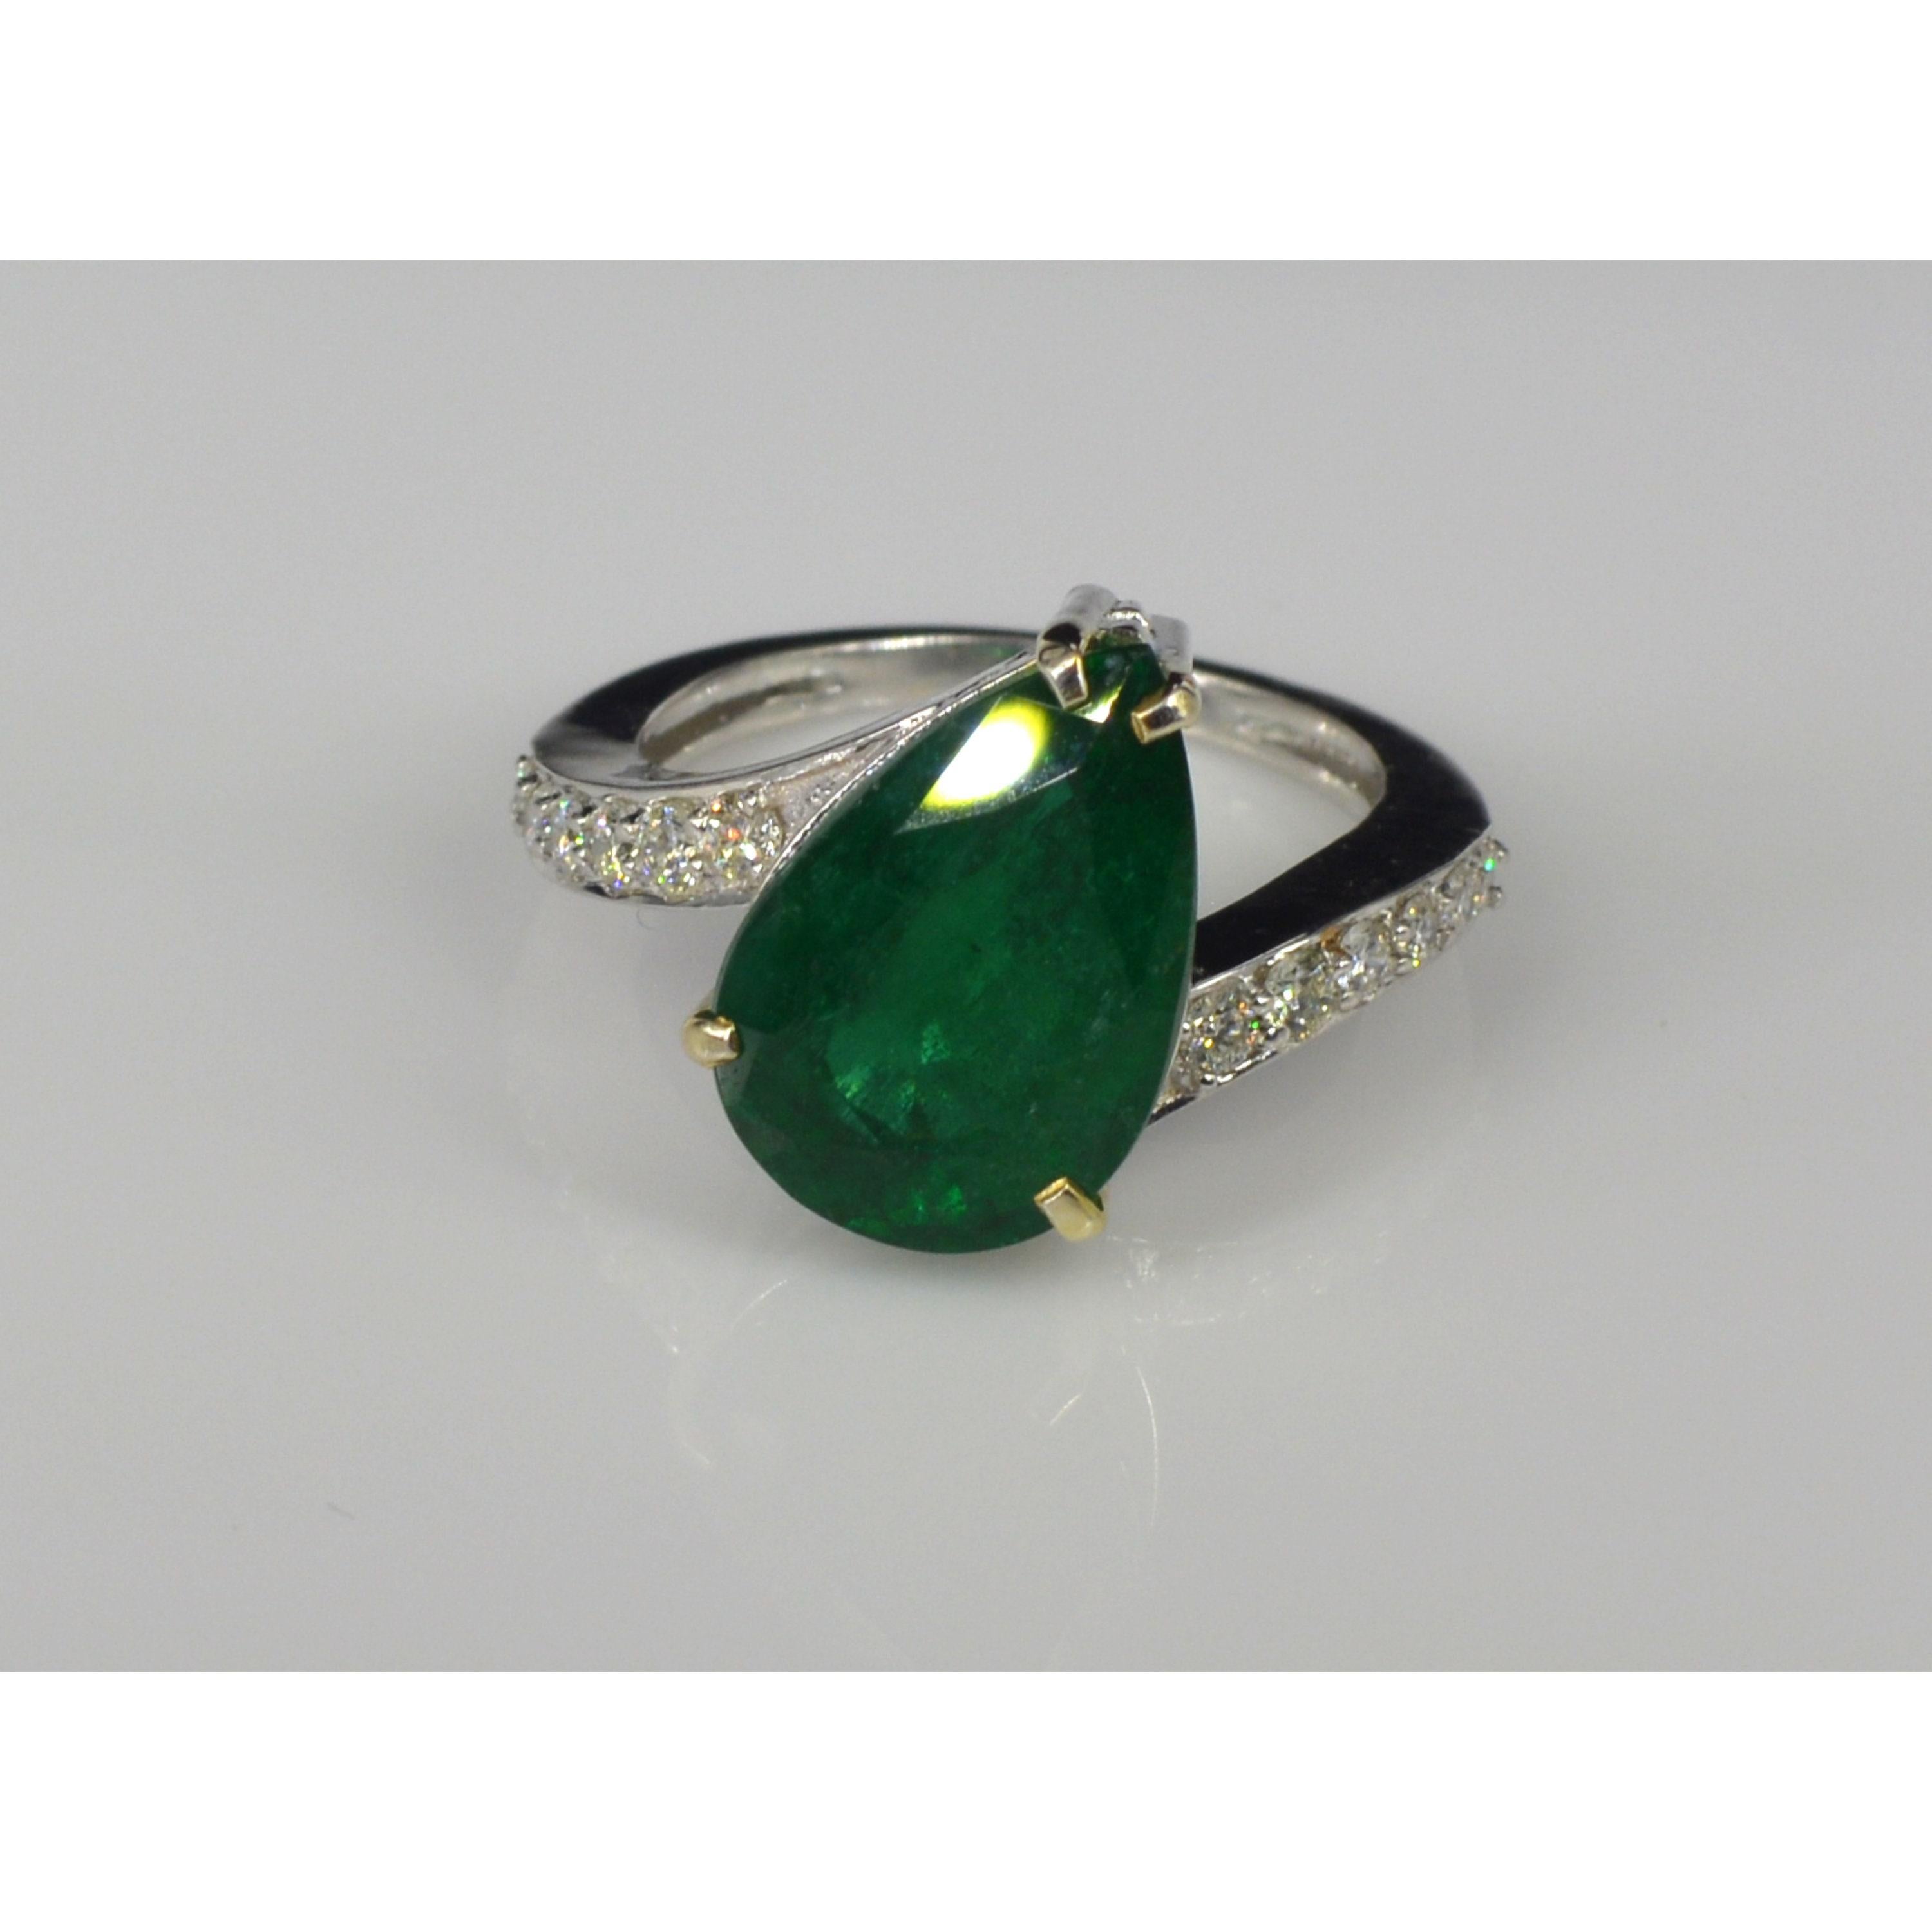 For Sale:  Art Deco Pear Cut 3 CT Natural Emerald Diamond Antique Style Cocktail Ring Band 7